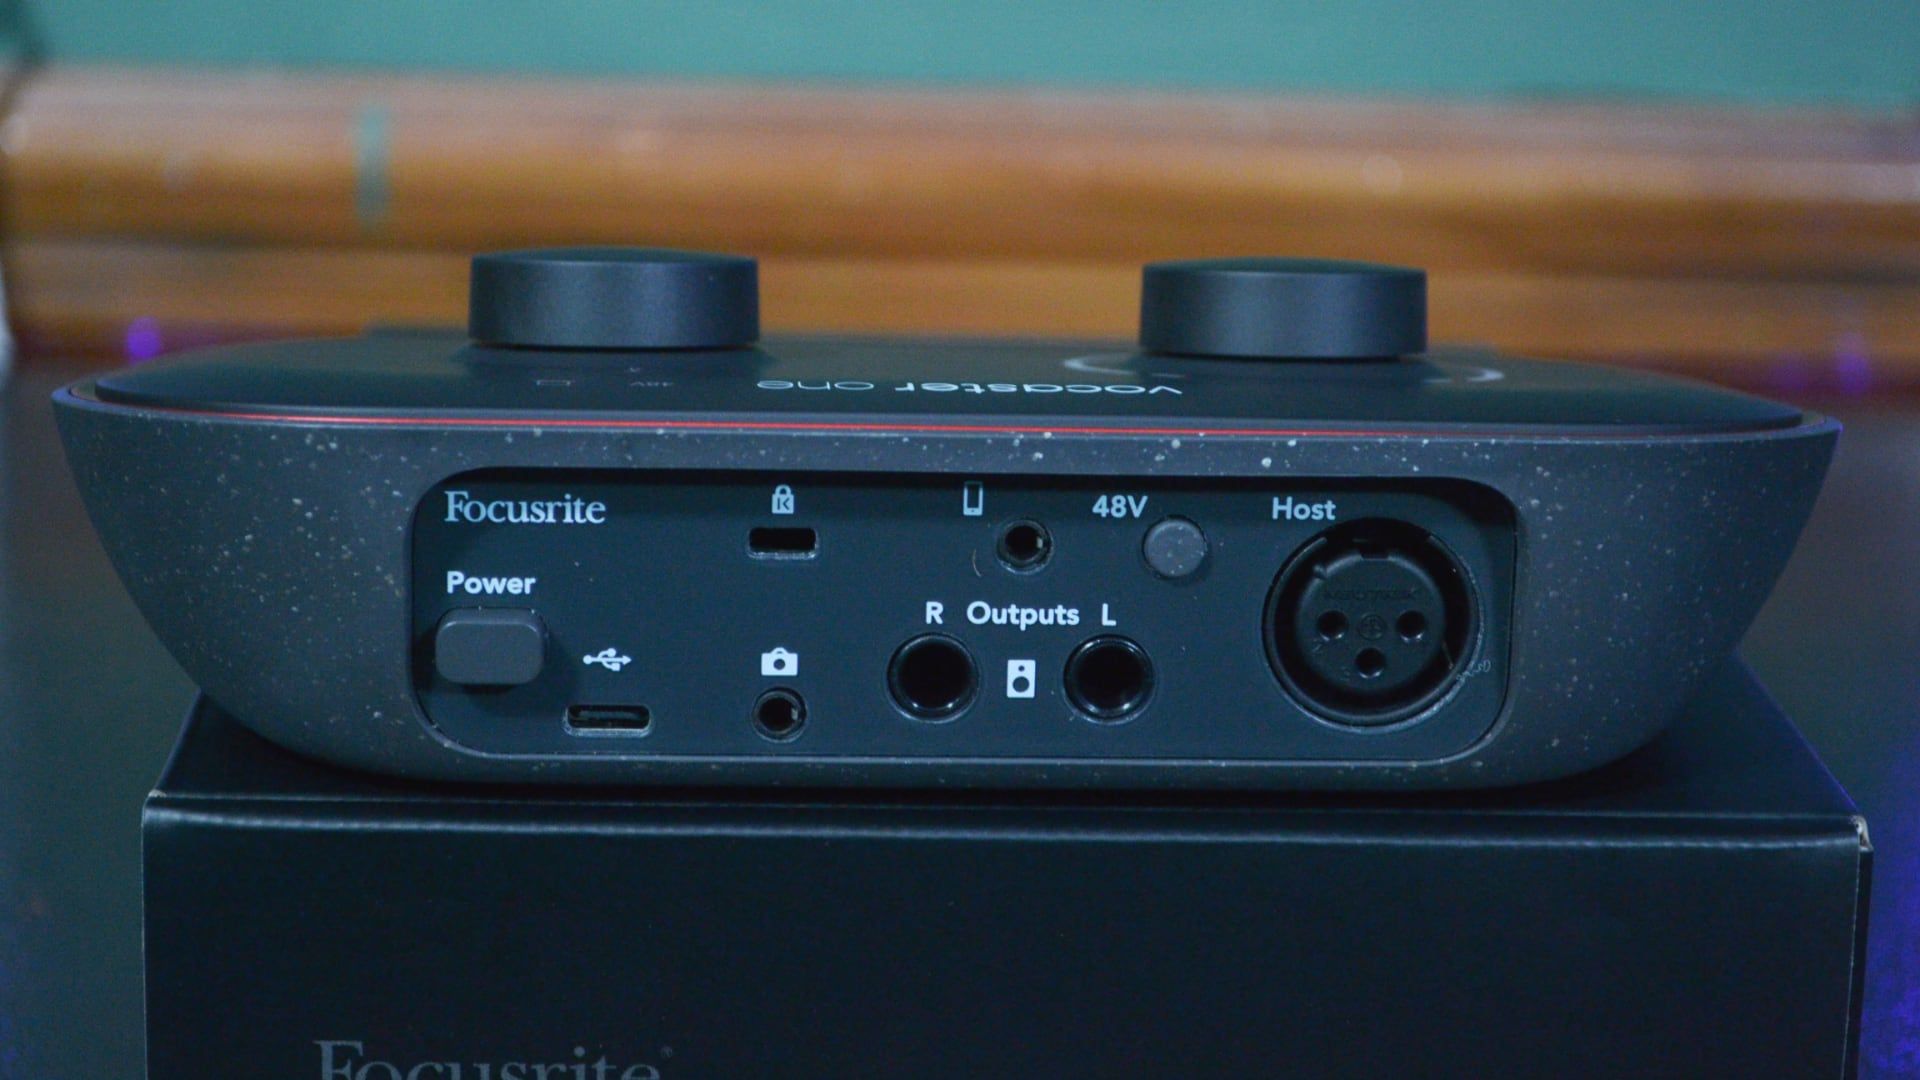 Focusrite Vocaster inputs and outputs